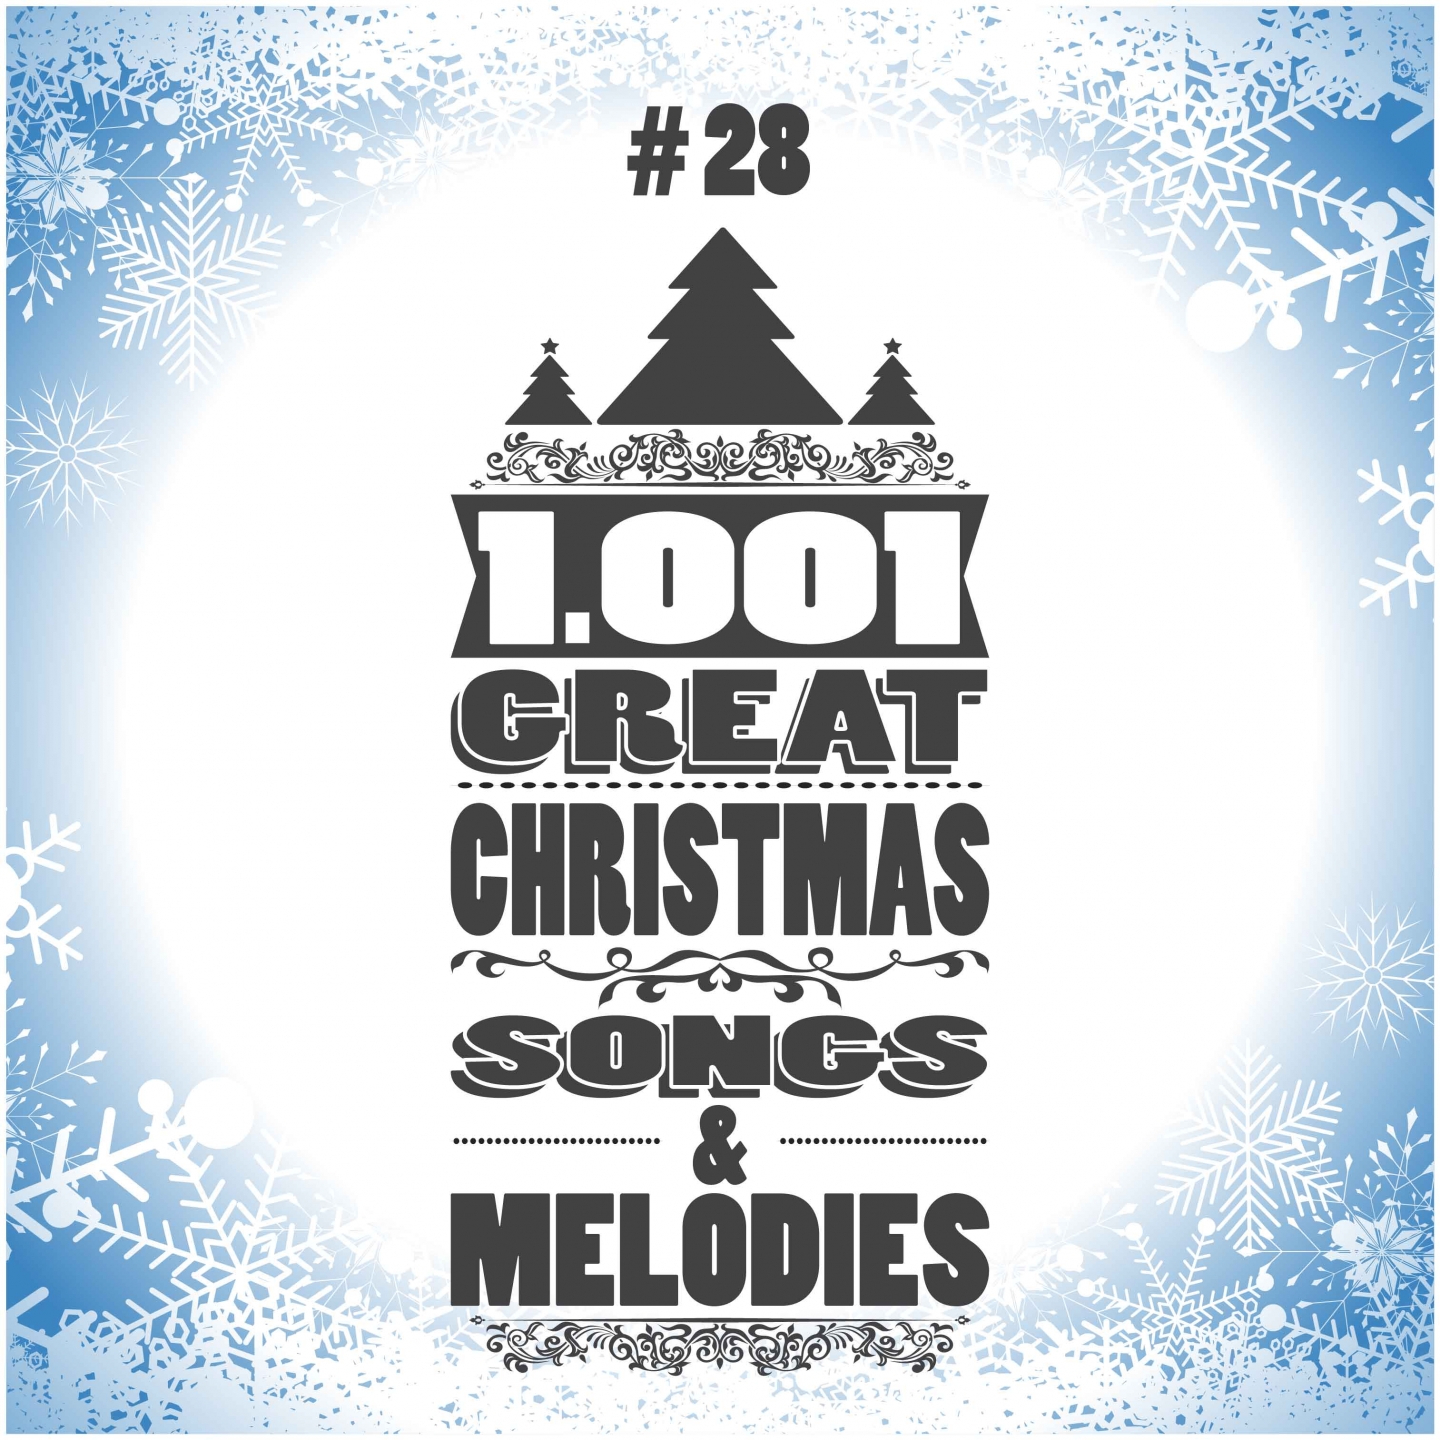 1001 Great Christmas Songs & Melodies, Vol. 28